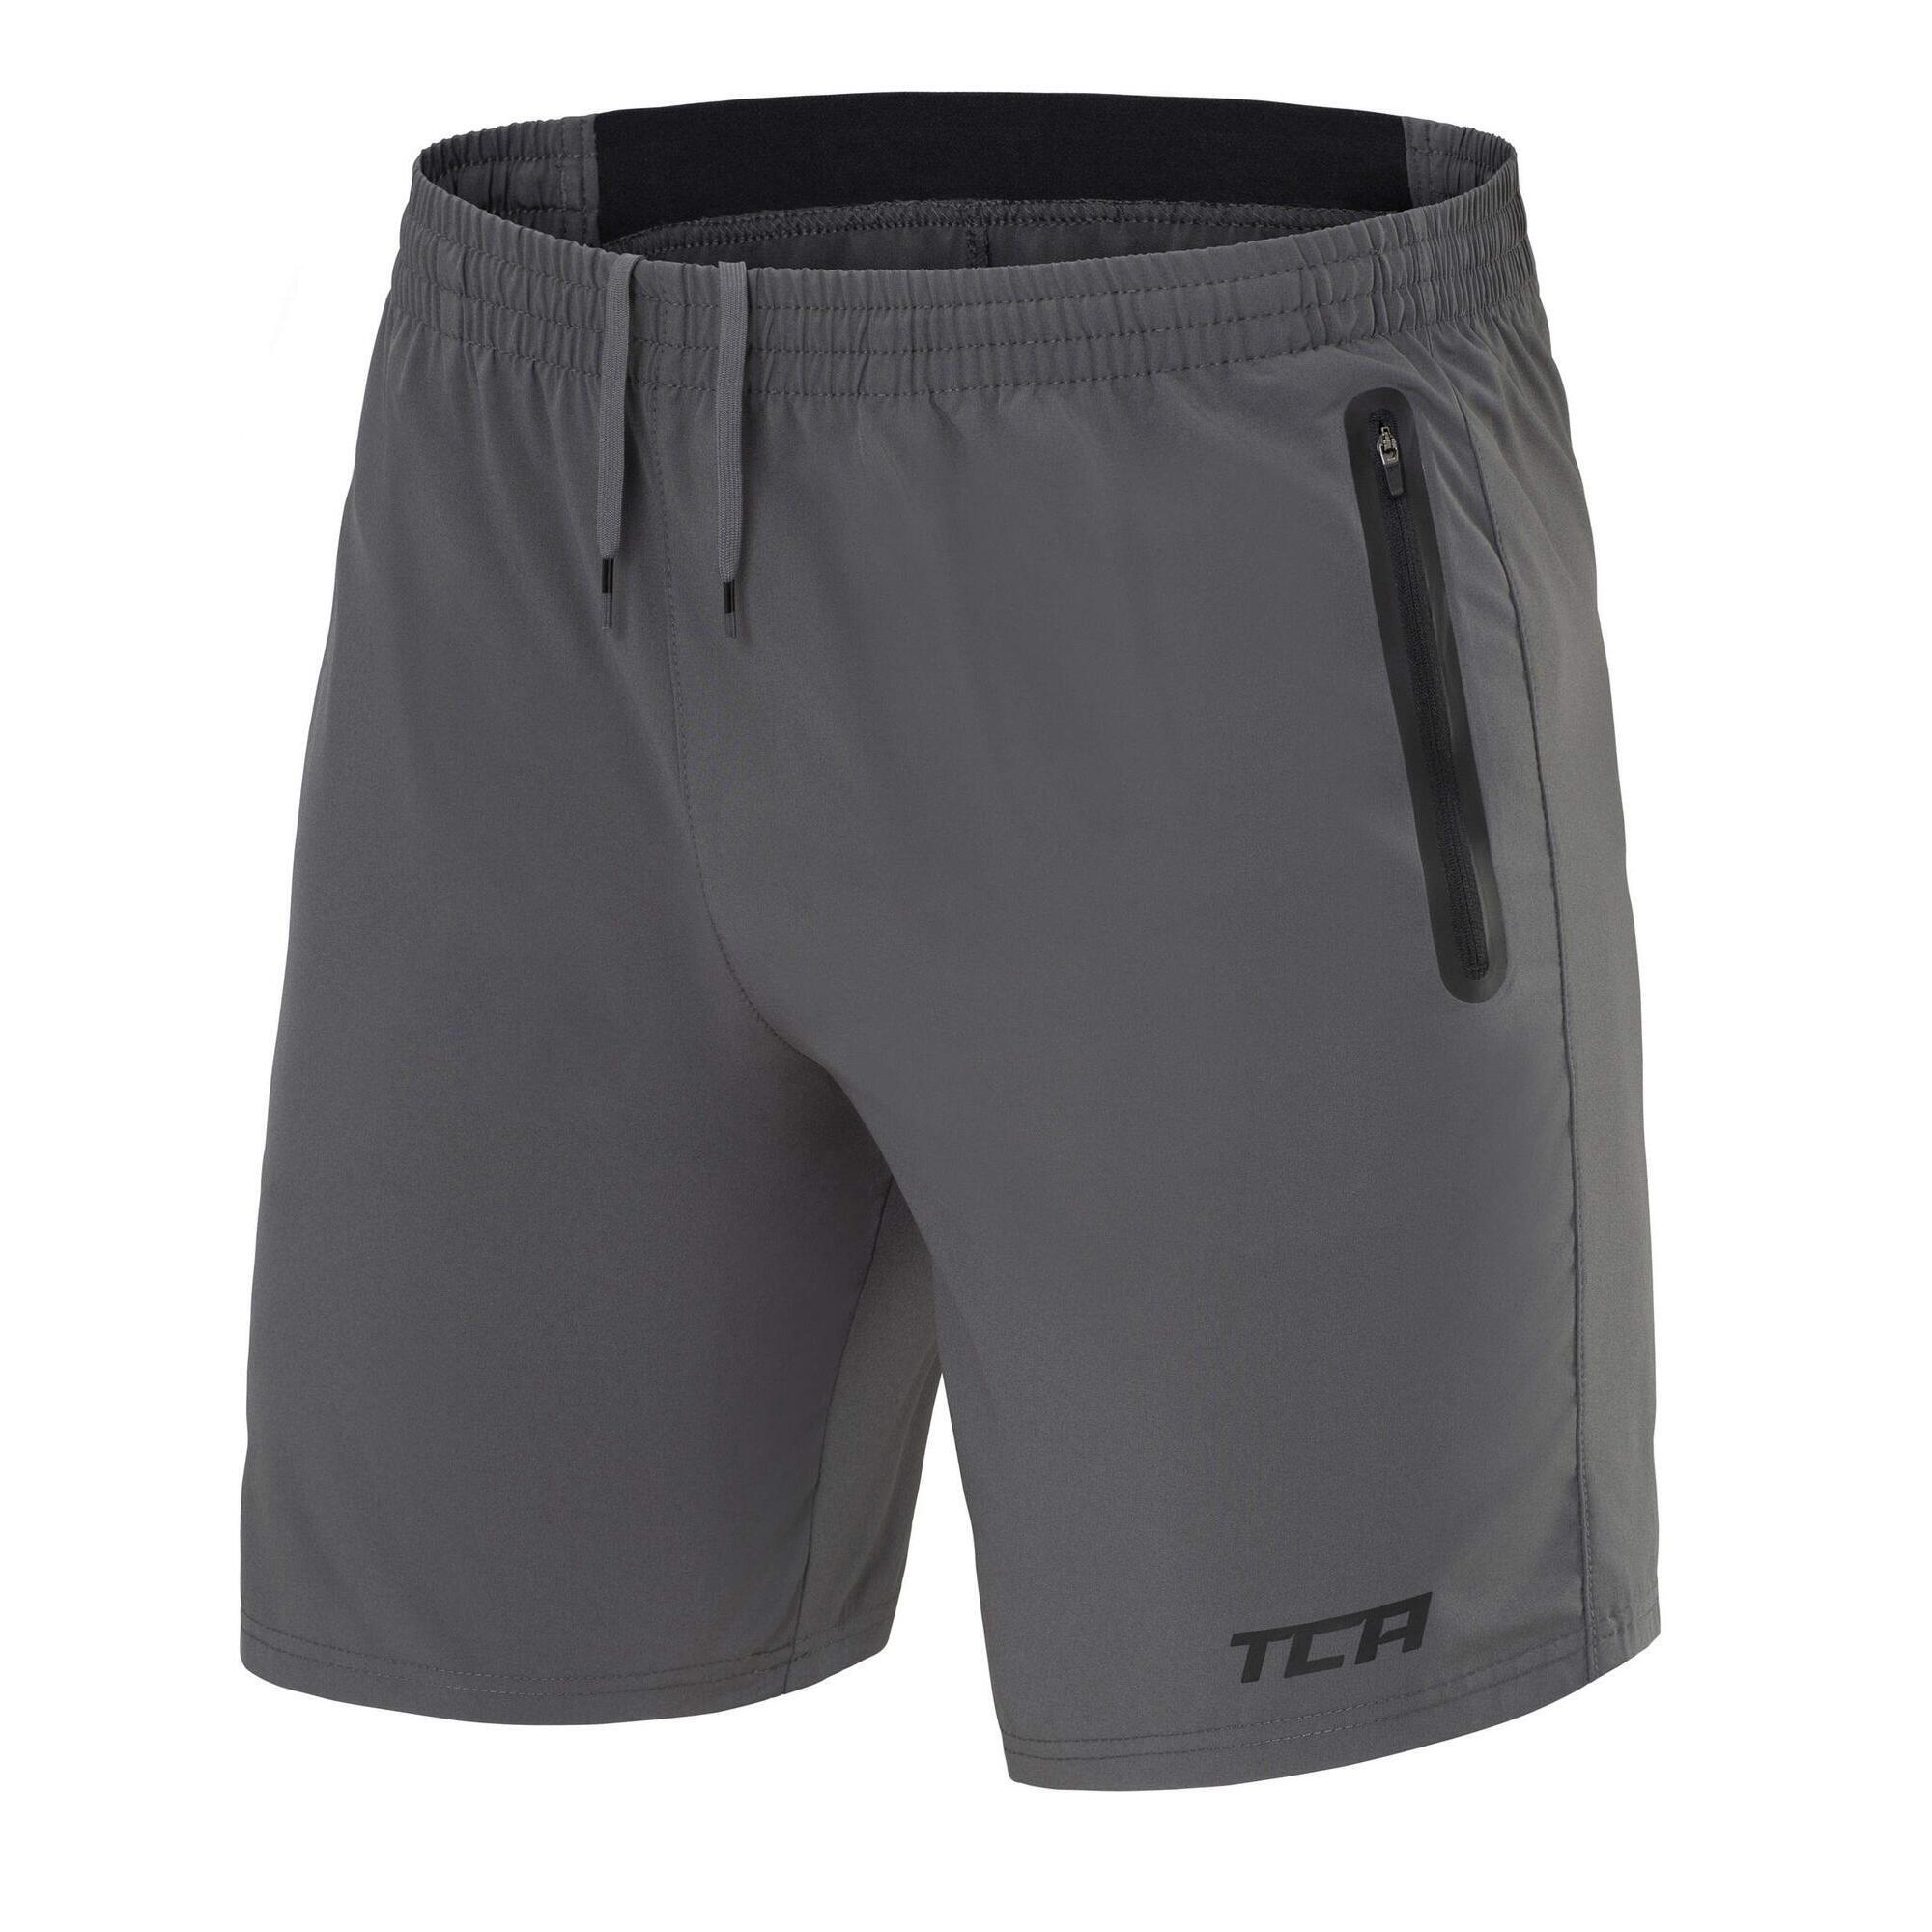 TCA Mens Elite Tech Lightweight Running or Gym Training Shorts with Zip Pockets 